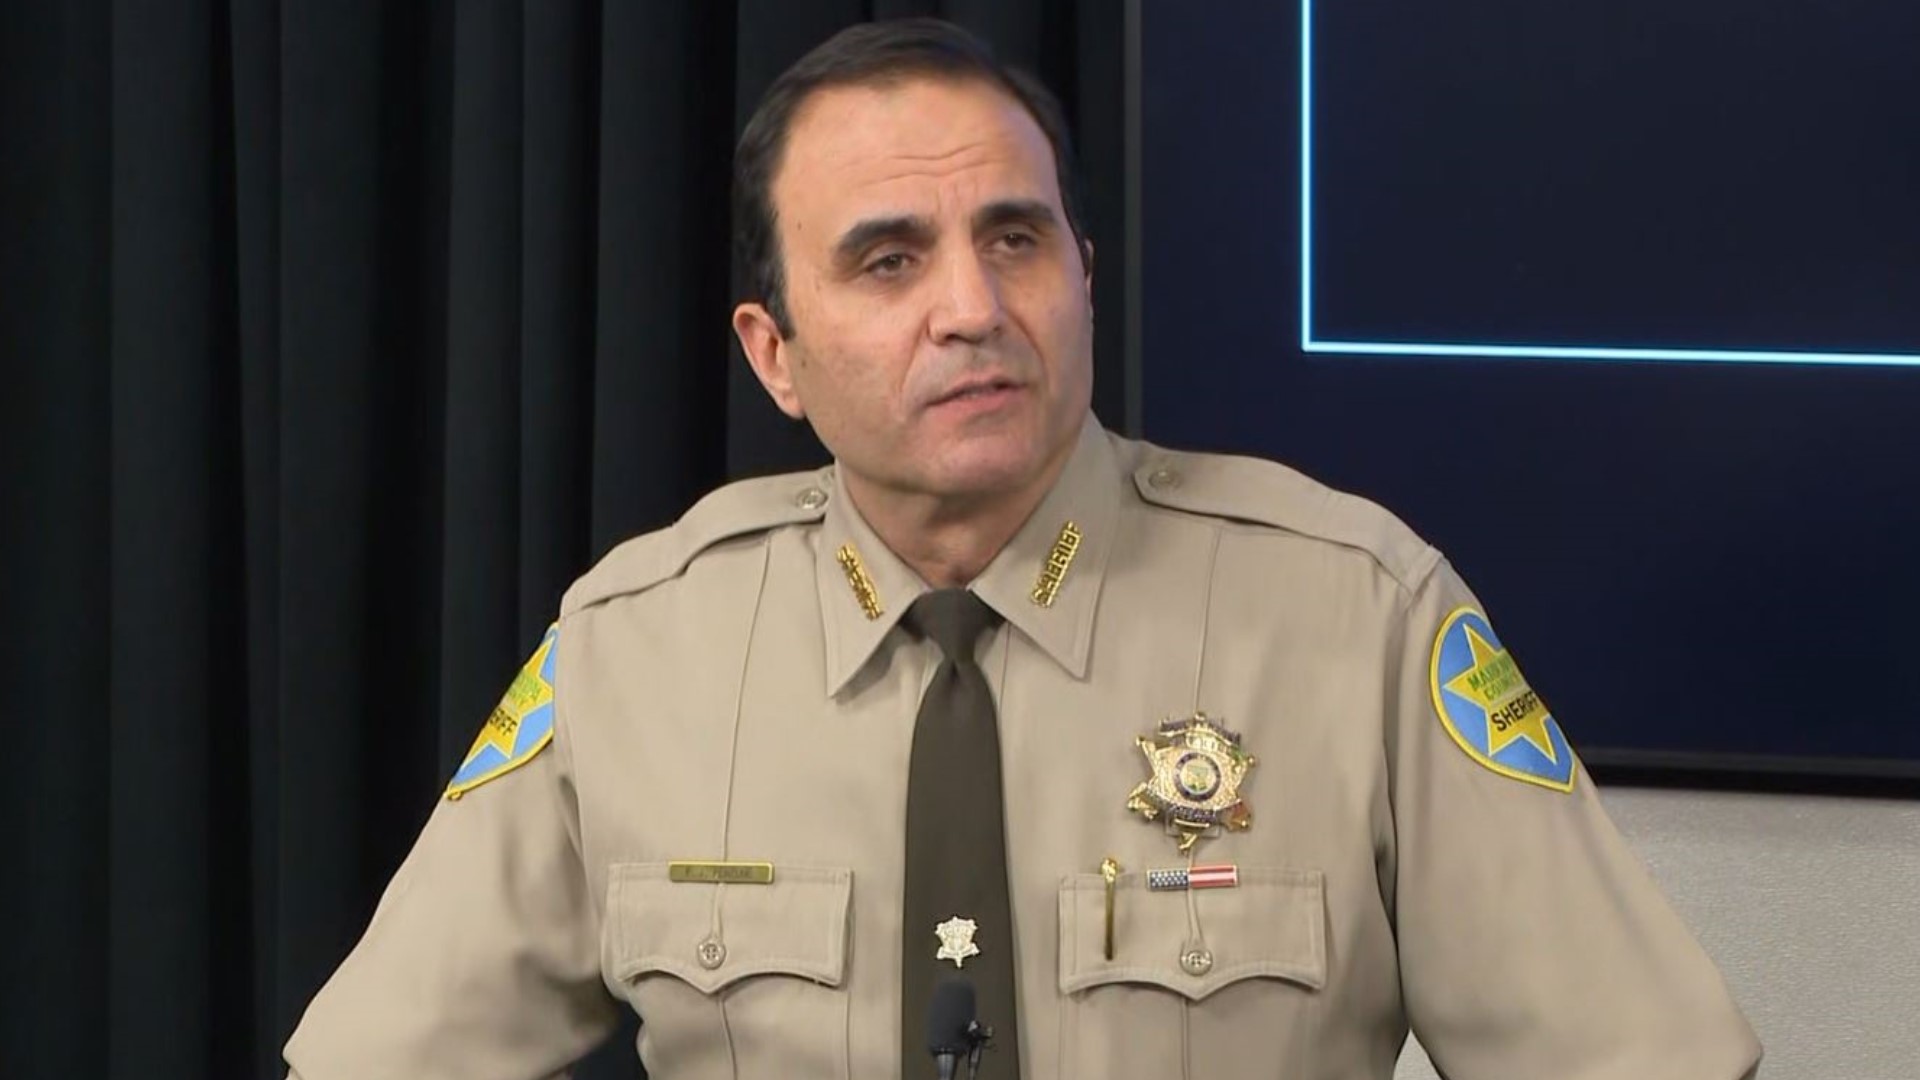 The Maricopa County Sheriff made the announcement during a news conference on Monday afternoon.